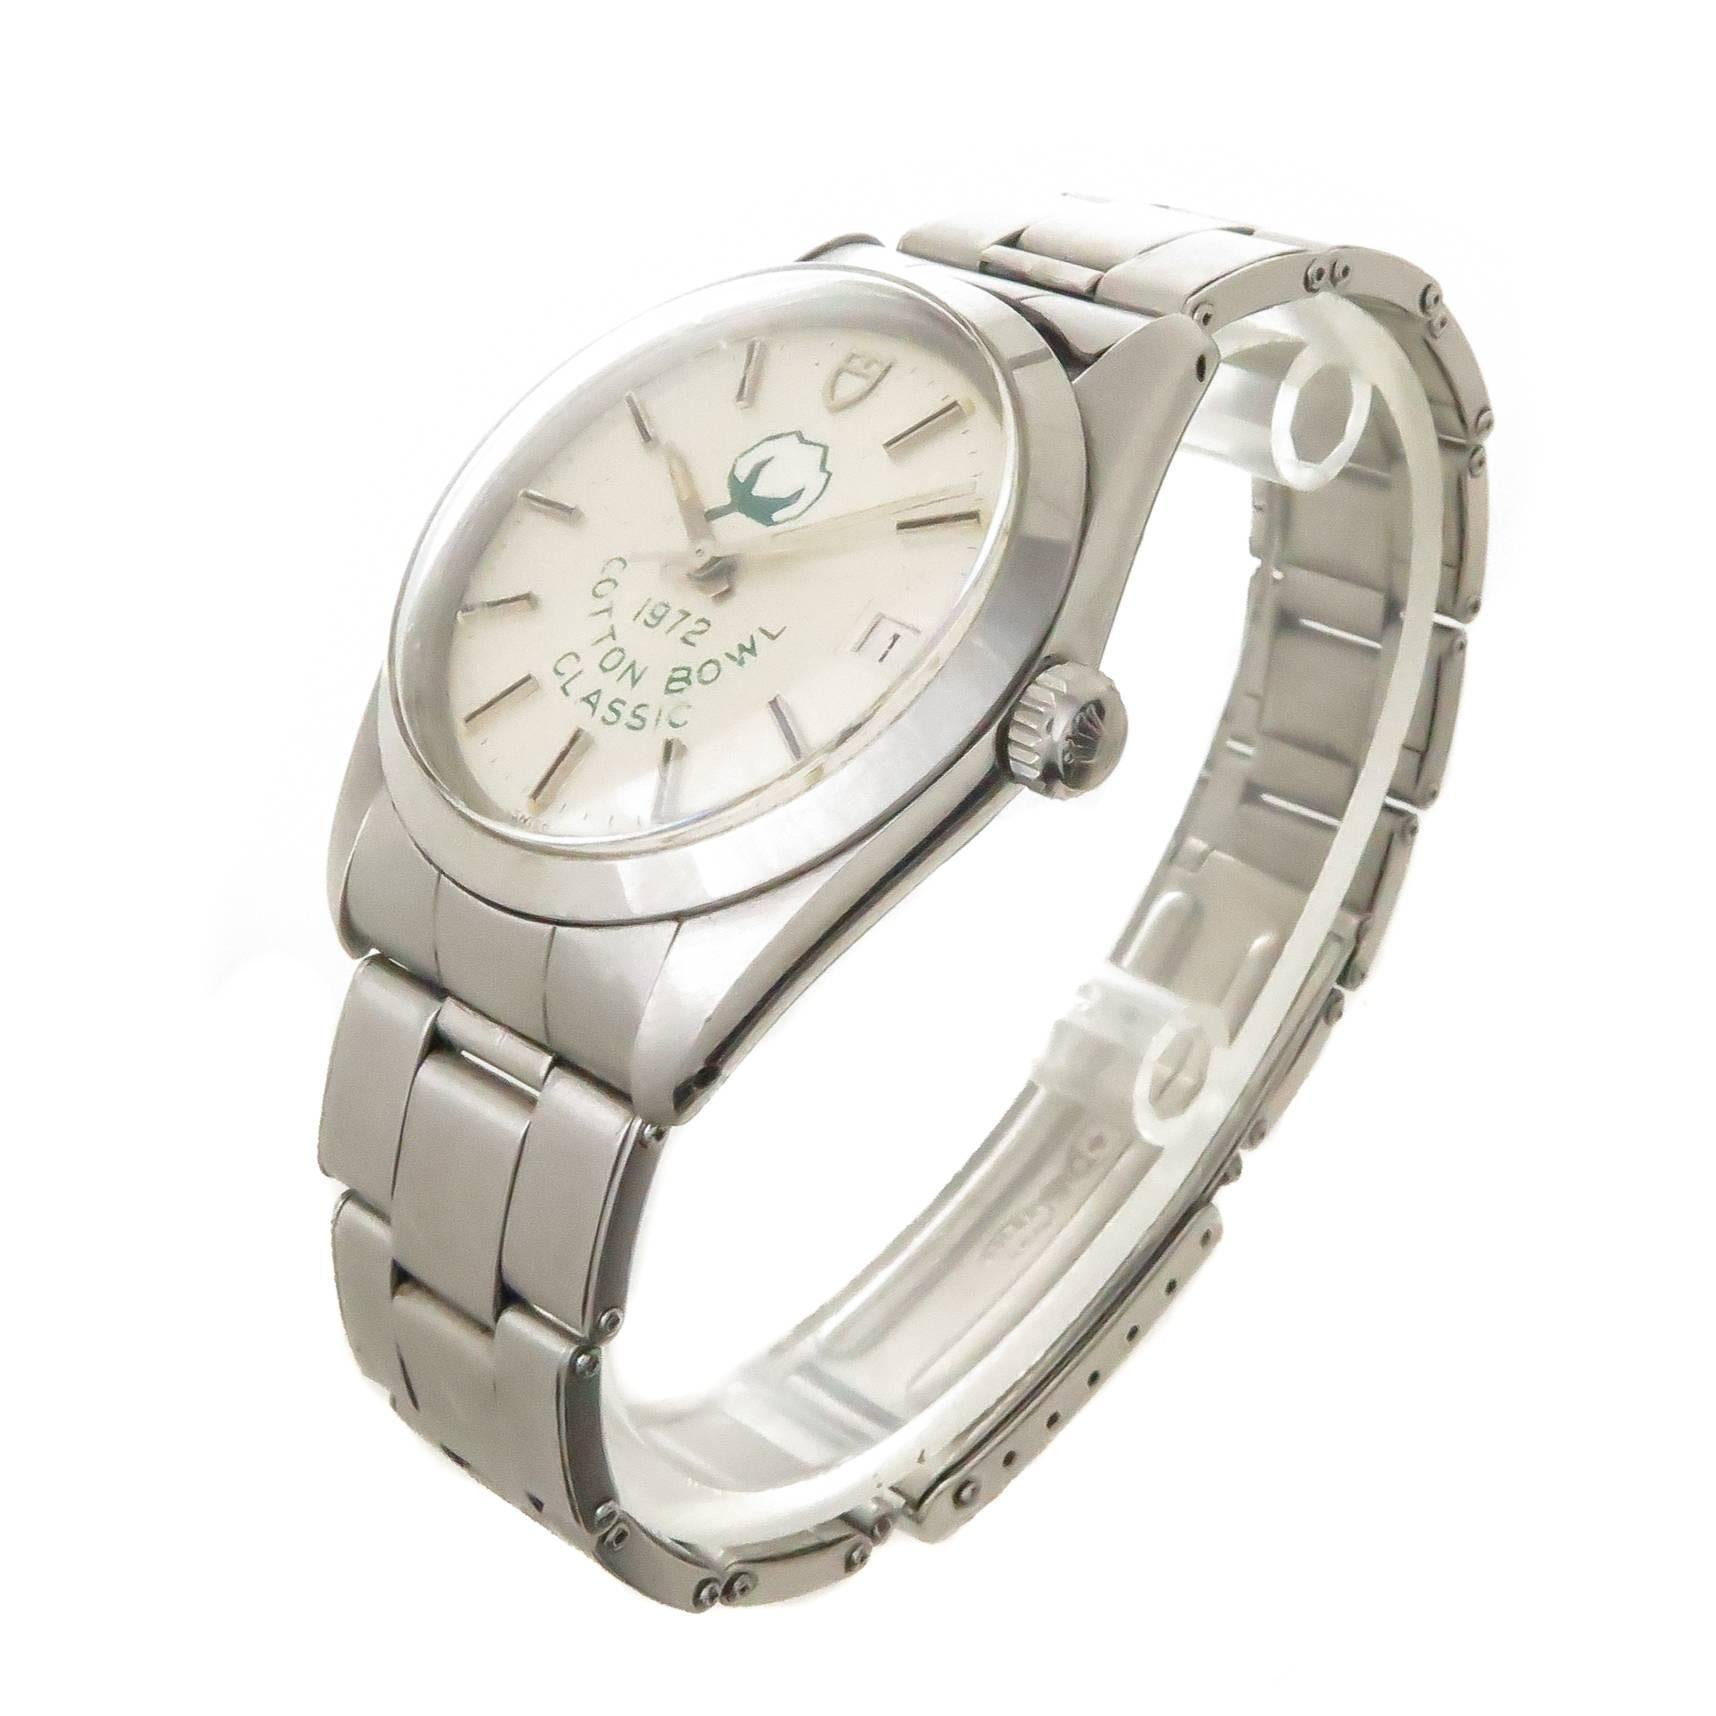 Tudor By Rolex 1972 Oyster Prince model, Cotton Bowl Classic Wrist Watch. 34 MM Stainless Steel Water Proof Case 25 jewel Automatic, self winding movement. Acrylic crystal, Date window at the 3 position. Silvered dial with raised markers. Steel